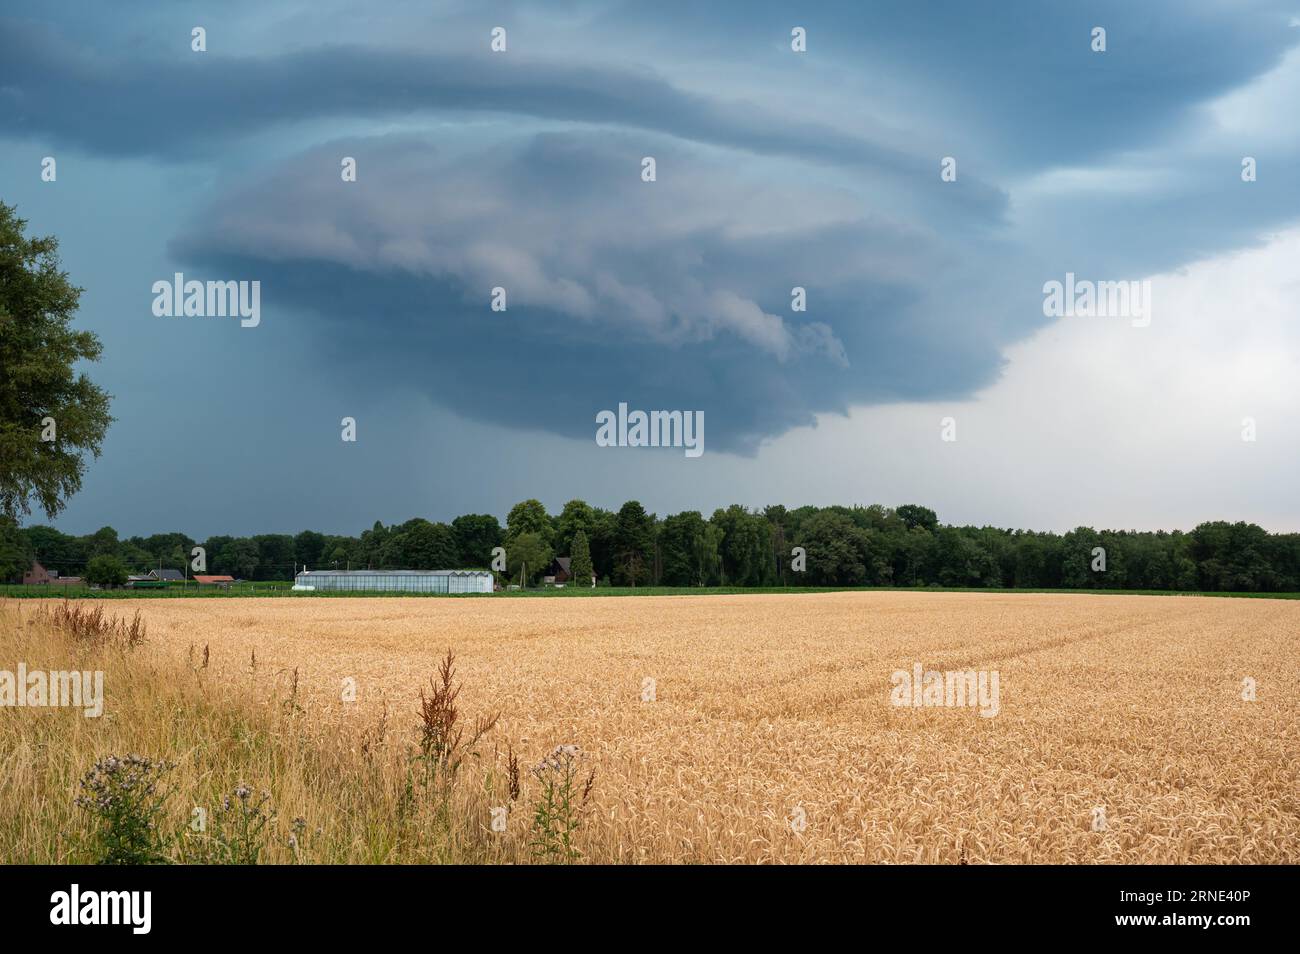 Golden agriculture fields of a farmland with dramatic cumulus clouds in the background, Geldern, North Rhine Westphalia, Germany Stock Photo